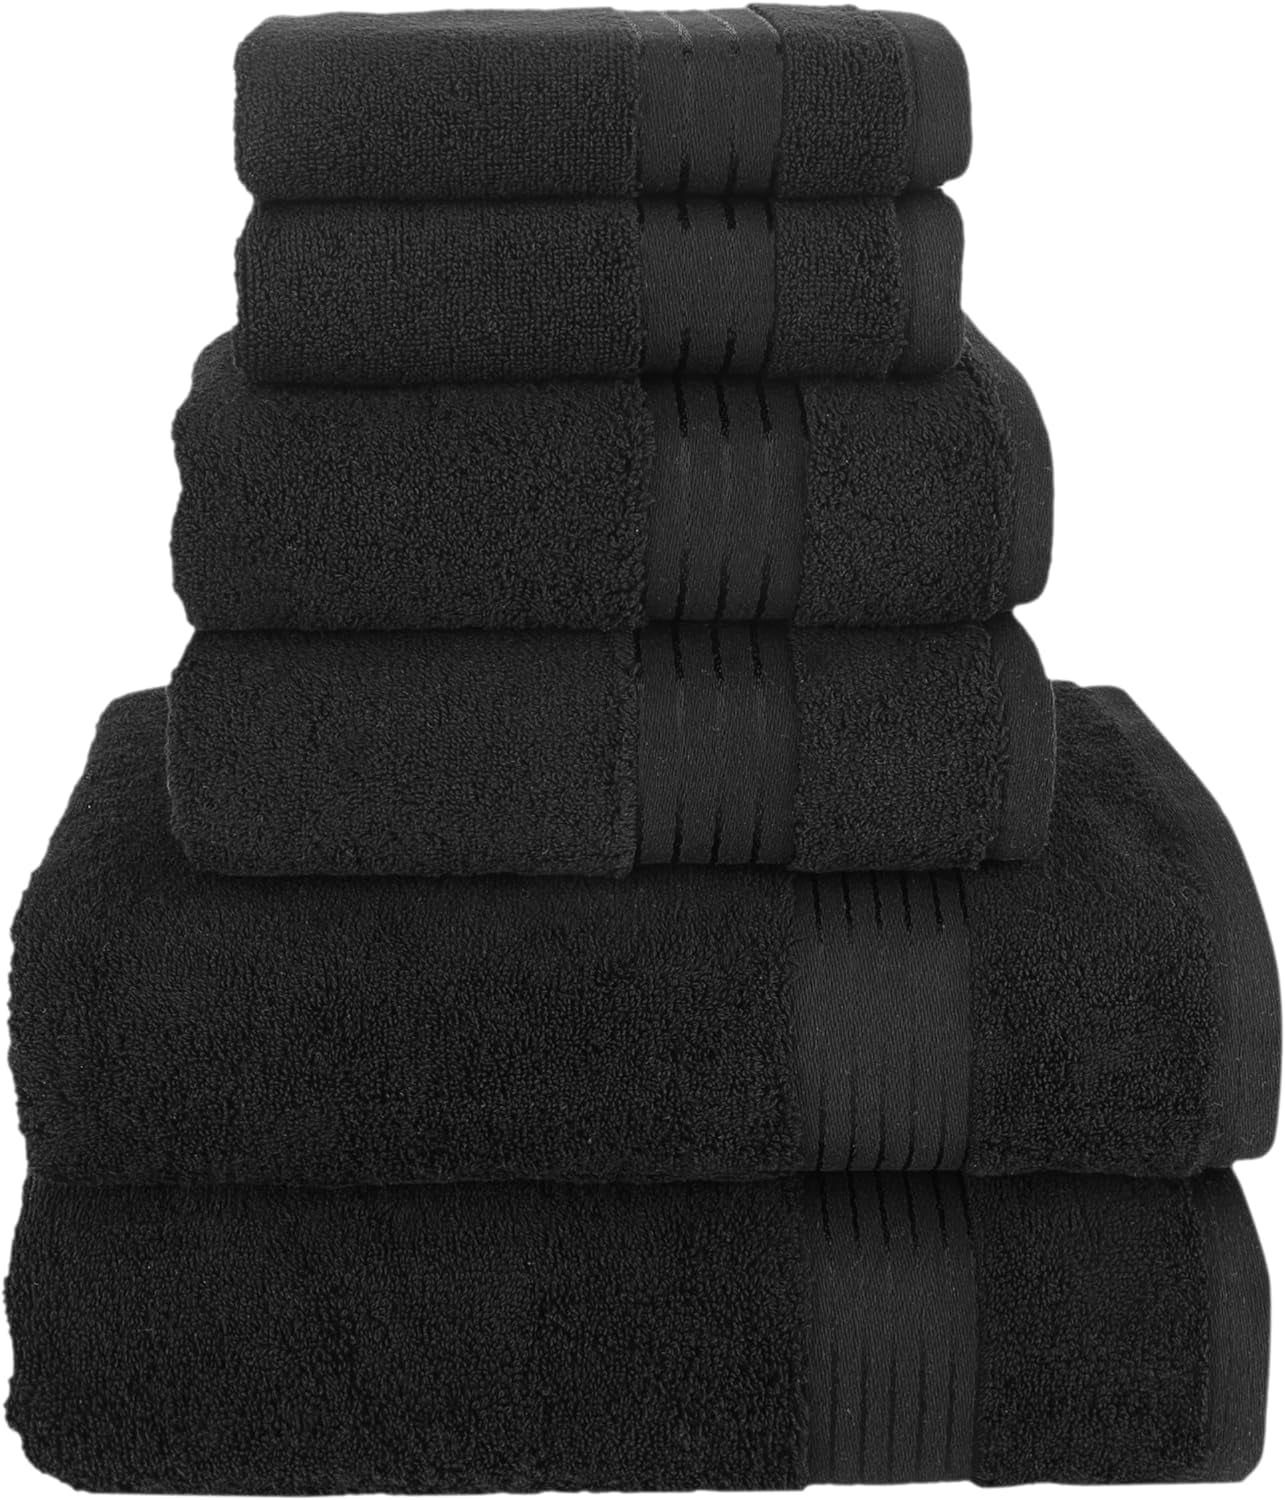 Indulge in Luxury with Checkered Bath Towels - 100% Cotton, Super Soft &  Absorbent, Fade-Resistant, Cozy, and Perfect for Gifting (2 Towels) (Black)